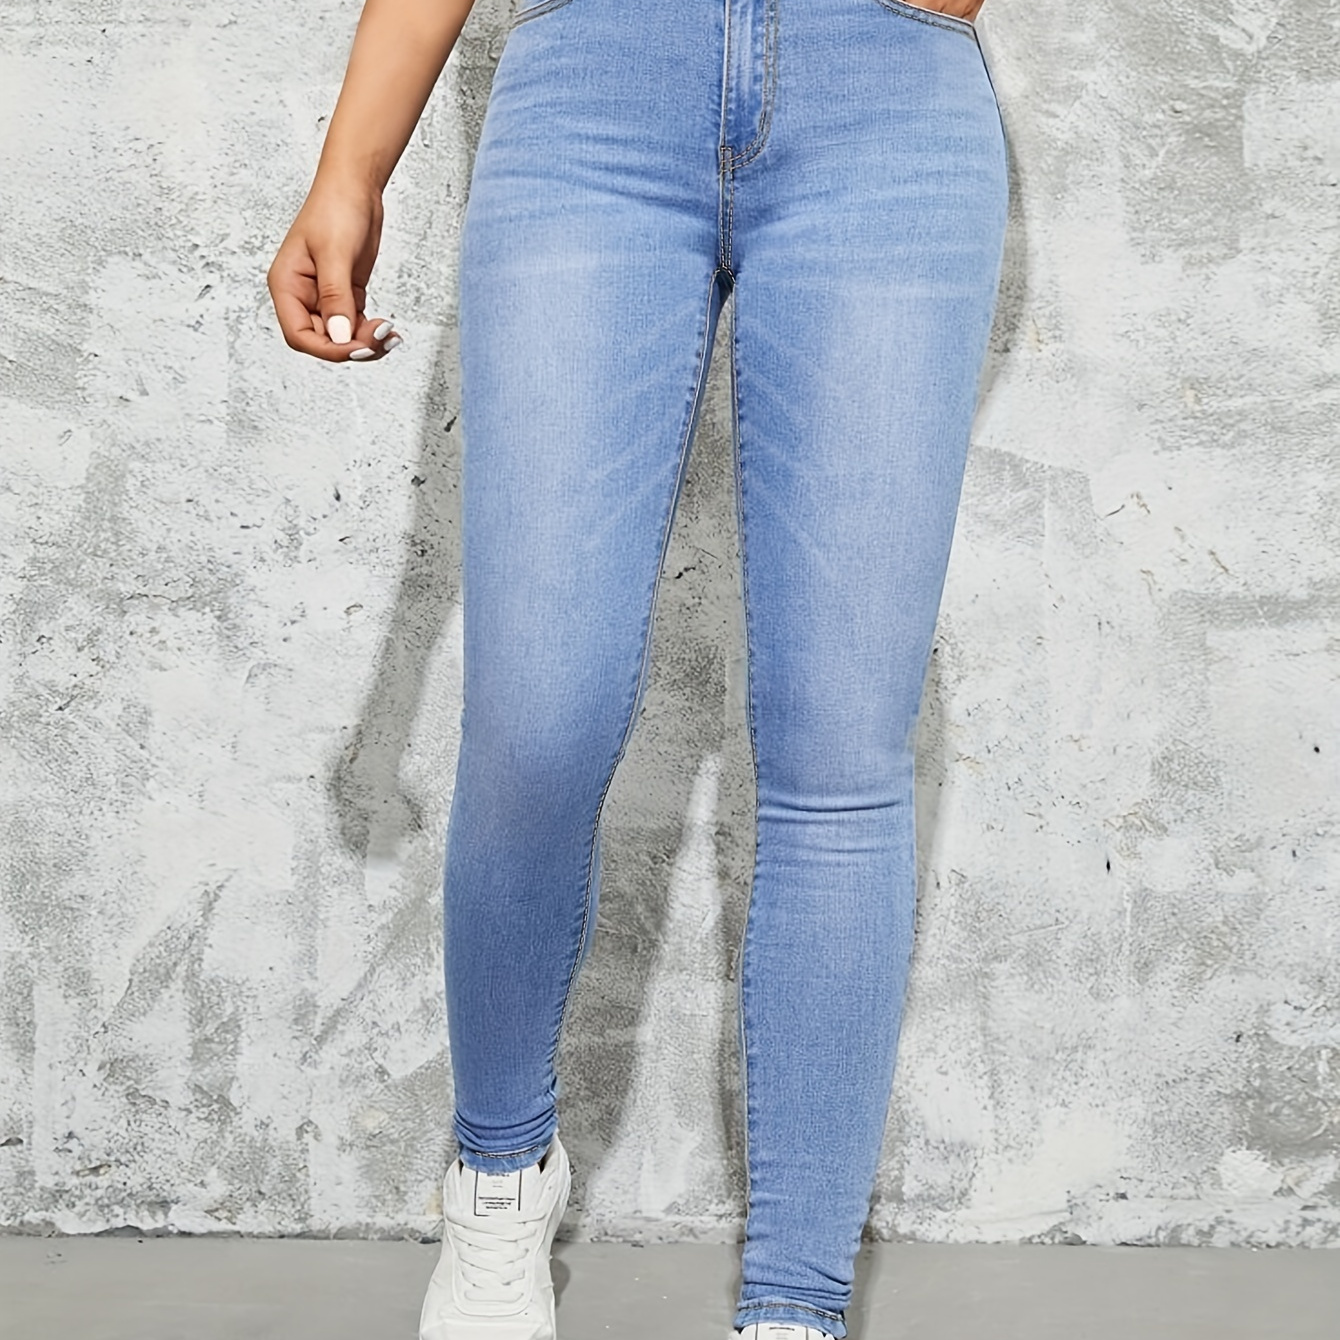 

Women's Light Washed Blue High-waisted Skinny Fit Jeans, Stretchy Fashionable Denim Pants, Slim Fit, Casual Preppy Style